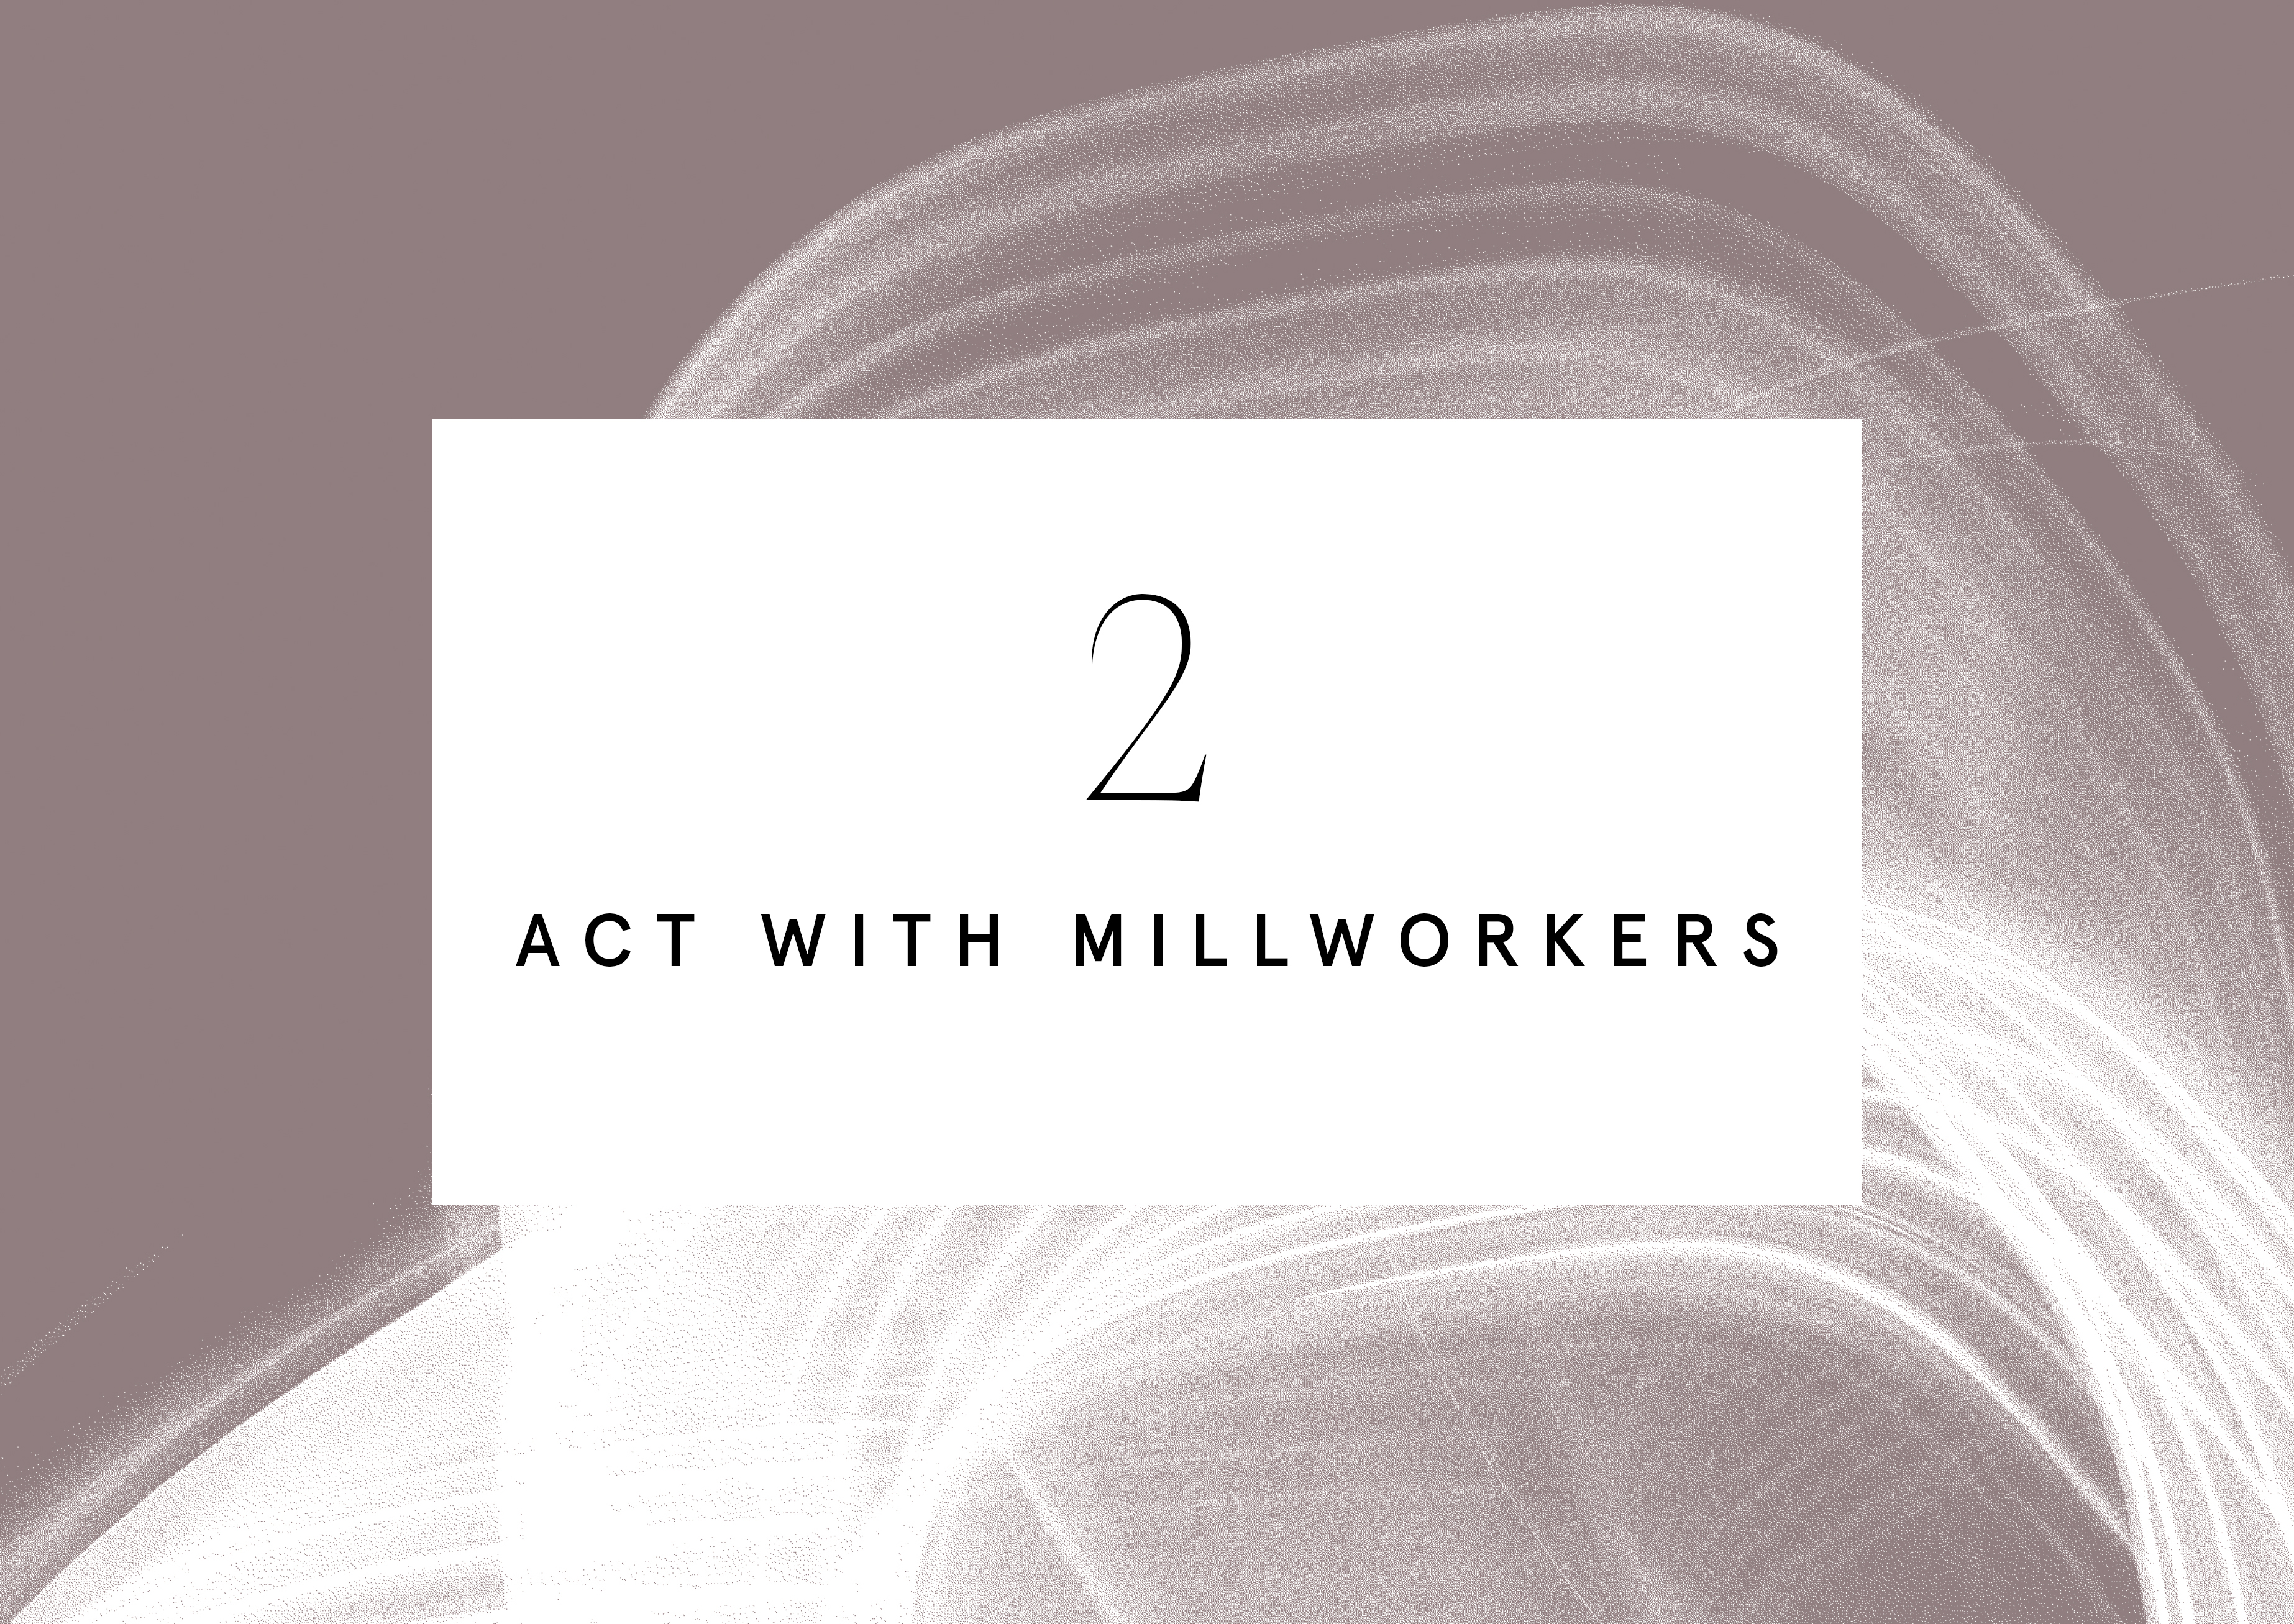 Act with millworkers Life360 in Stores 2022